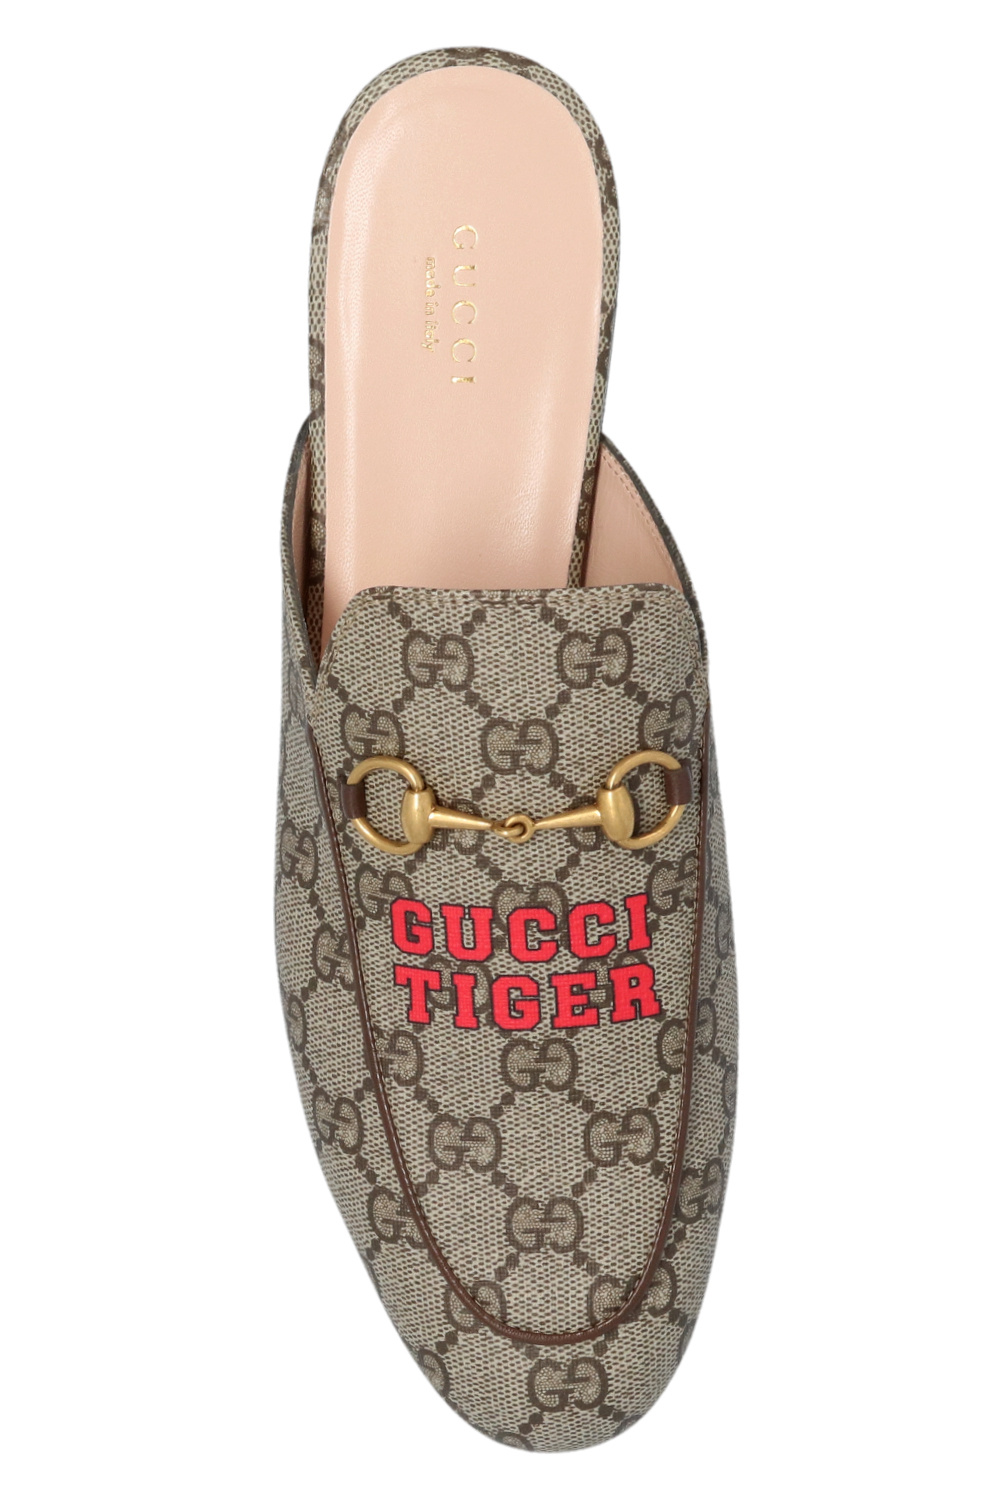 Gucci Slides from the ‘Gucci Tiger’ collection